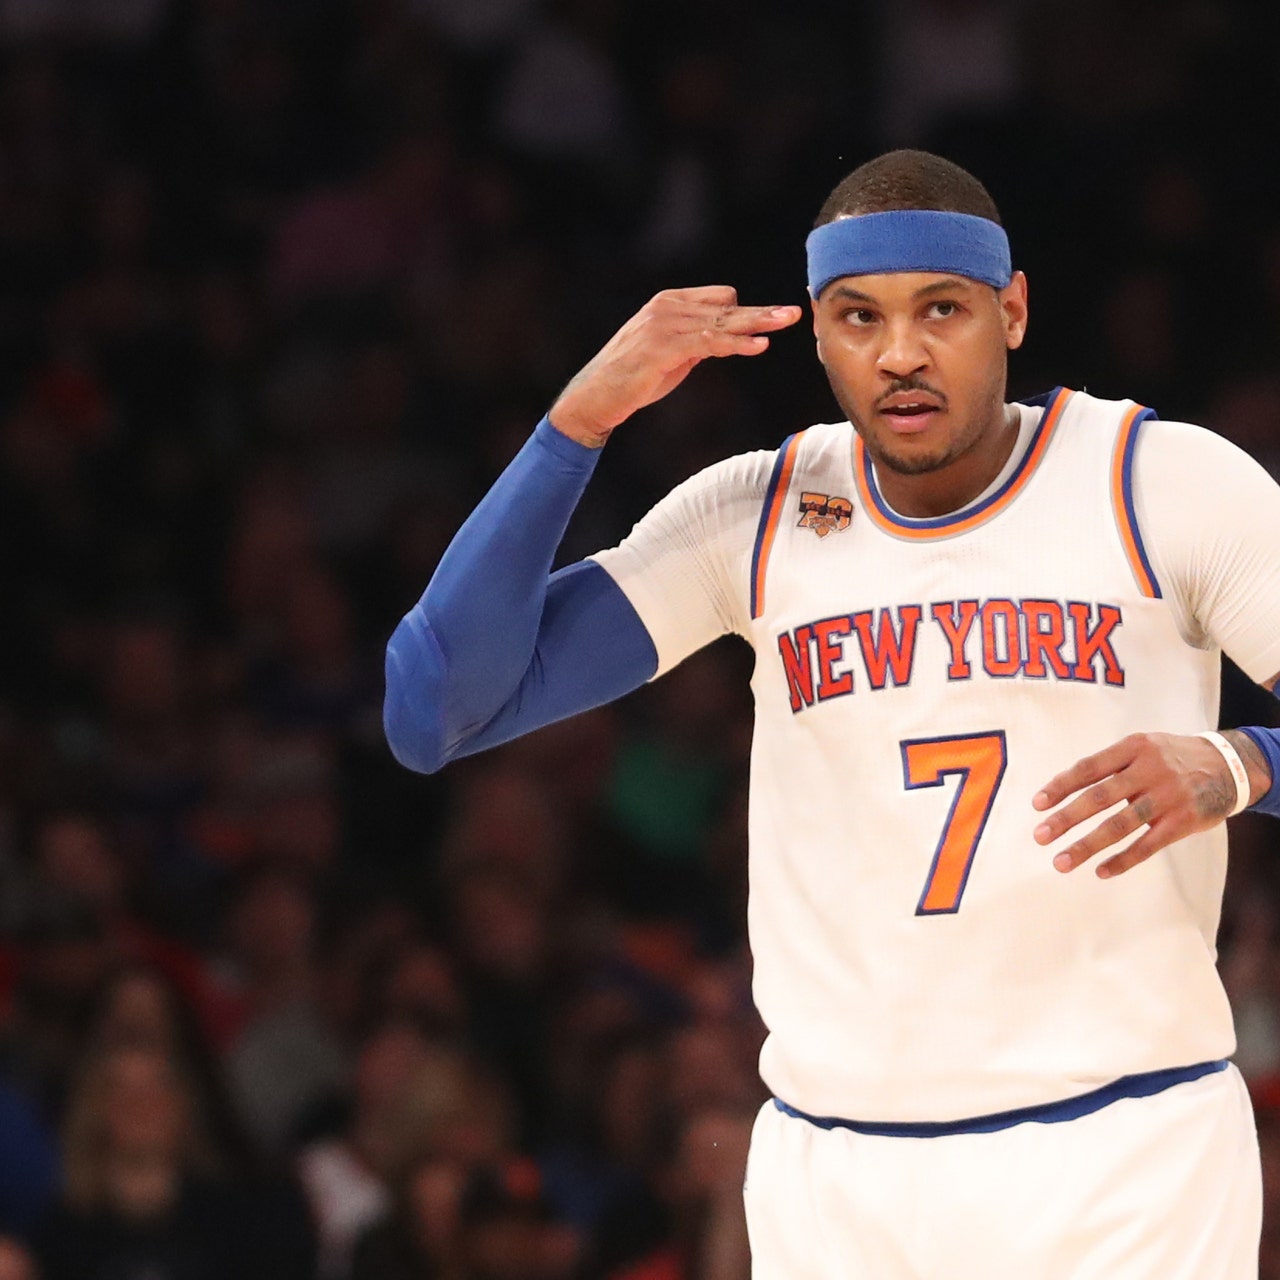 Could Lakers' Carmelo Anthony become a Sixth Man of the Year candidate?